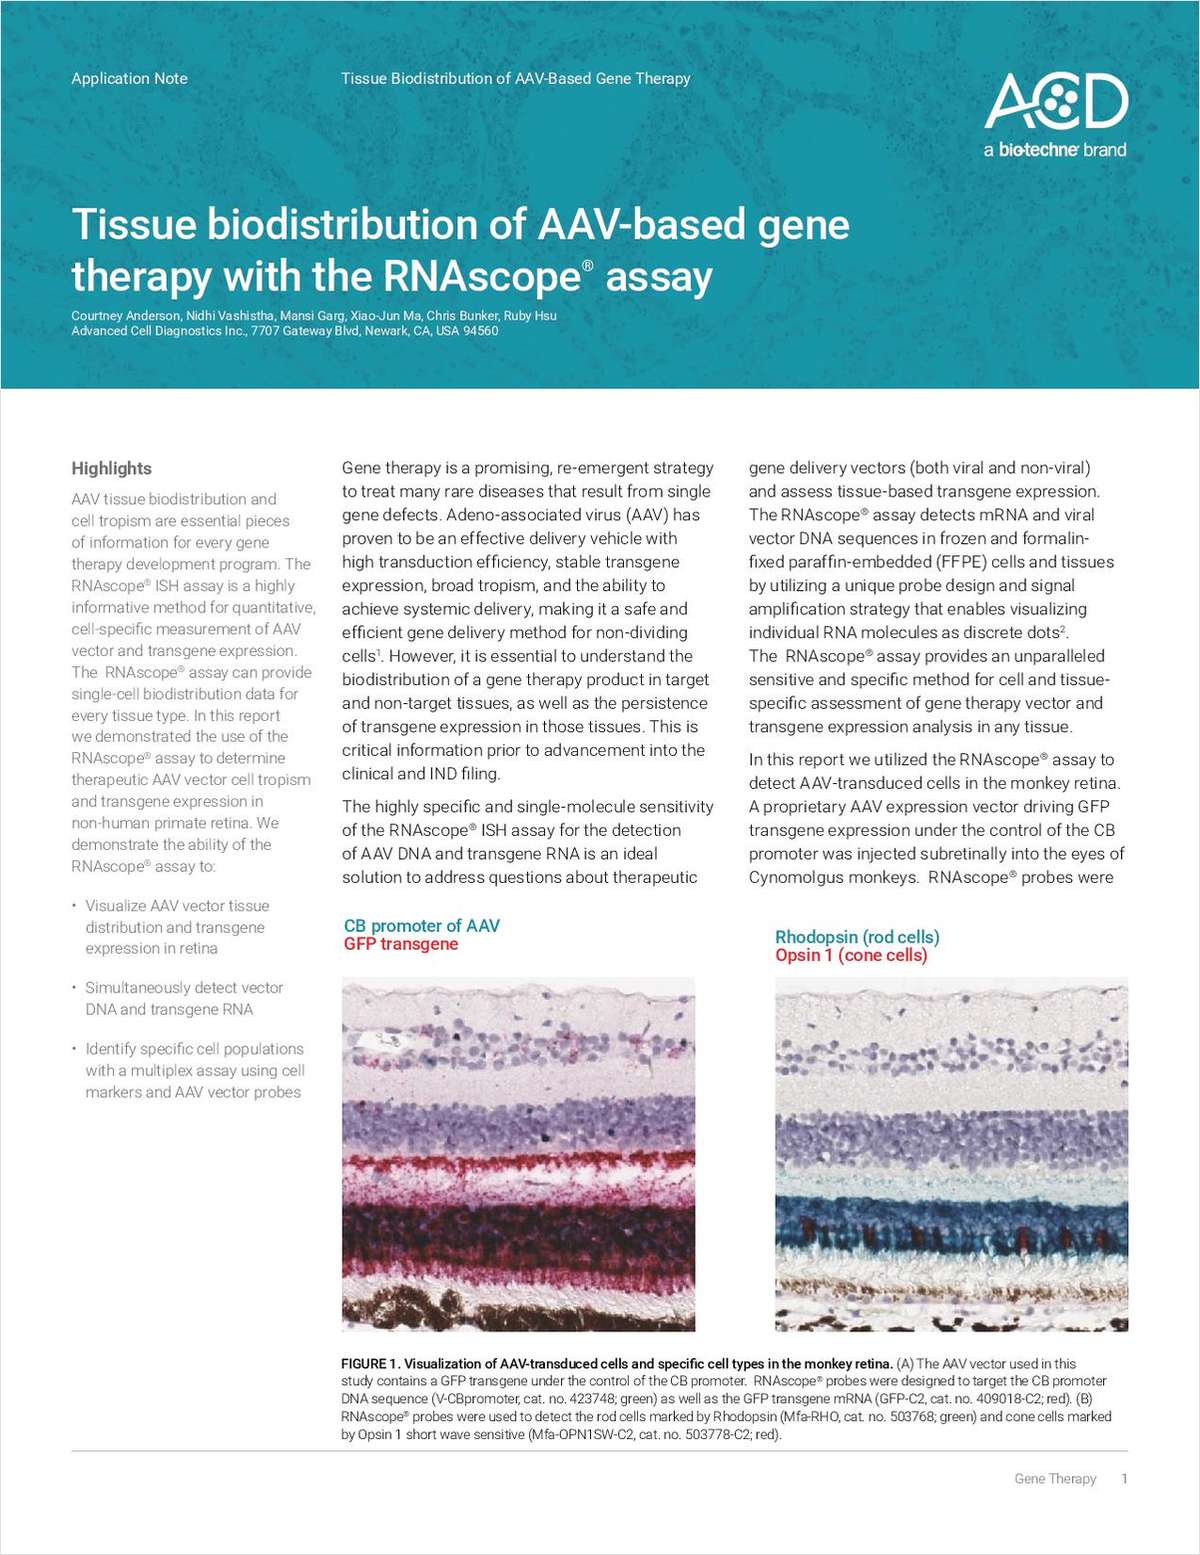 Tissue Biodistribution of AAV-Based Gene Therapy with the RNAscope Assay